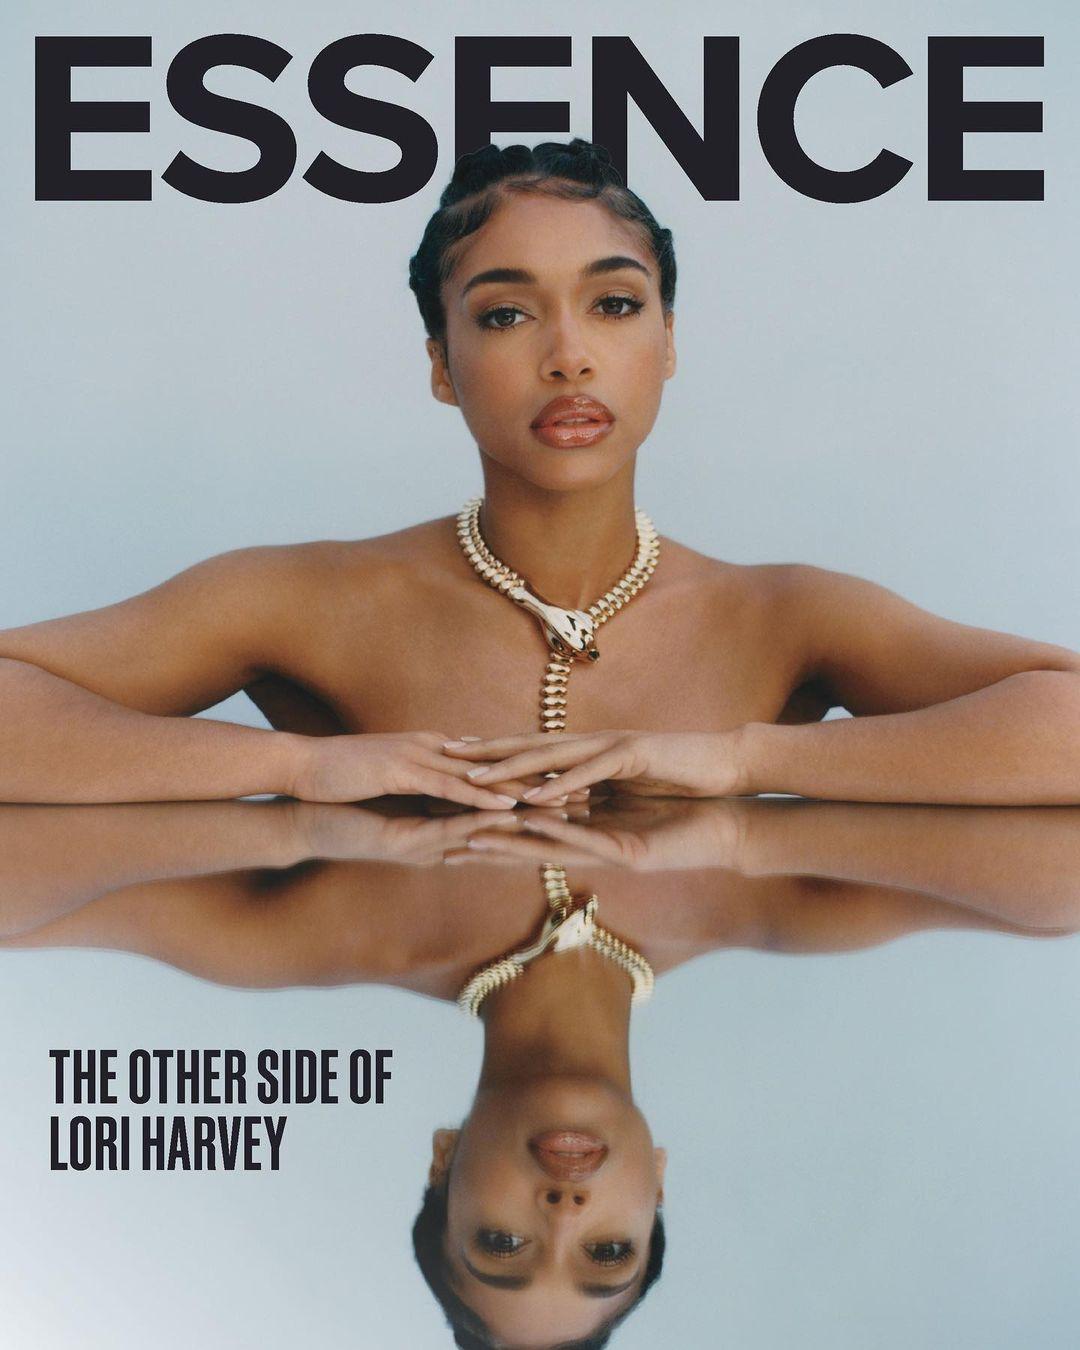 Lori Harvey Protects Her Heart With Revealing Metal Chest Plate